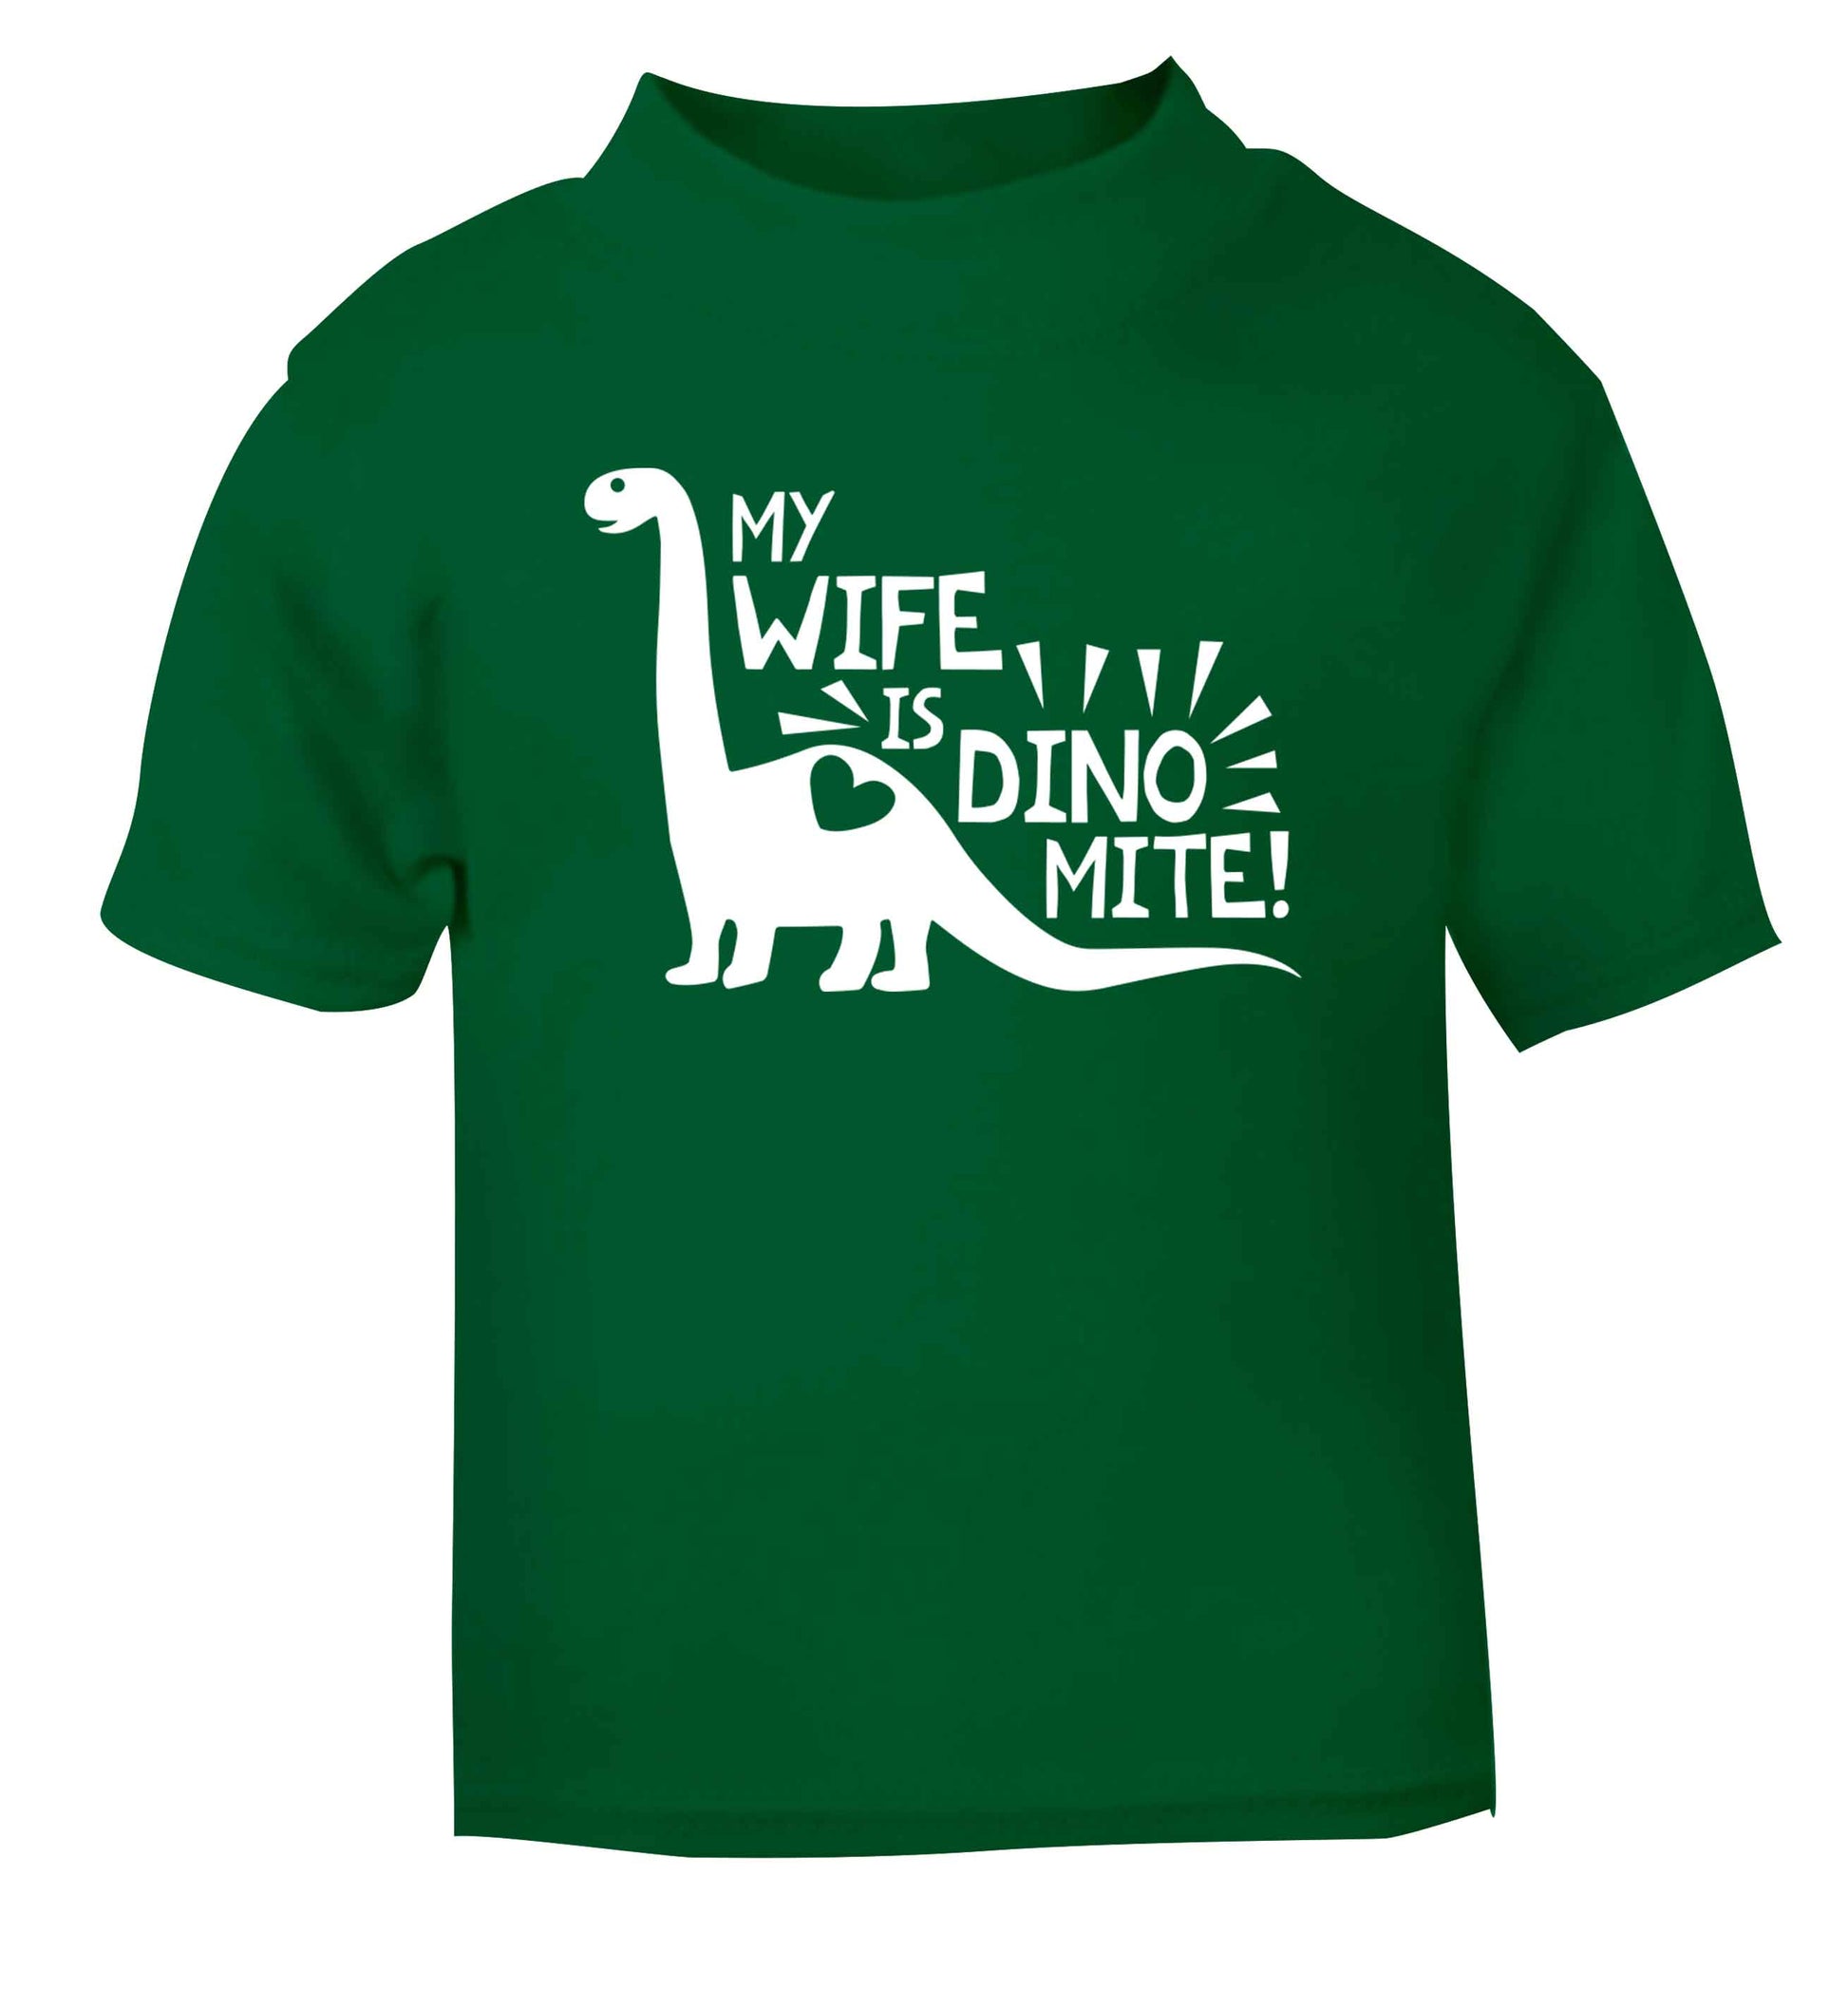 My wife is dinomite! green Baby Toddler Tshirt 2 Years